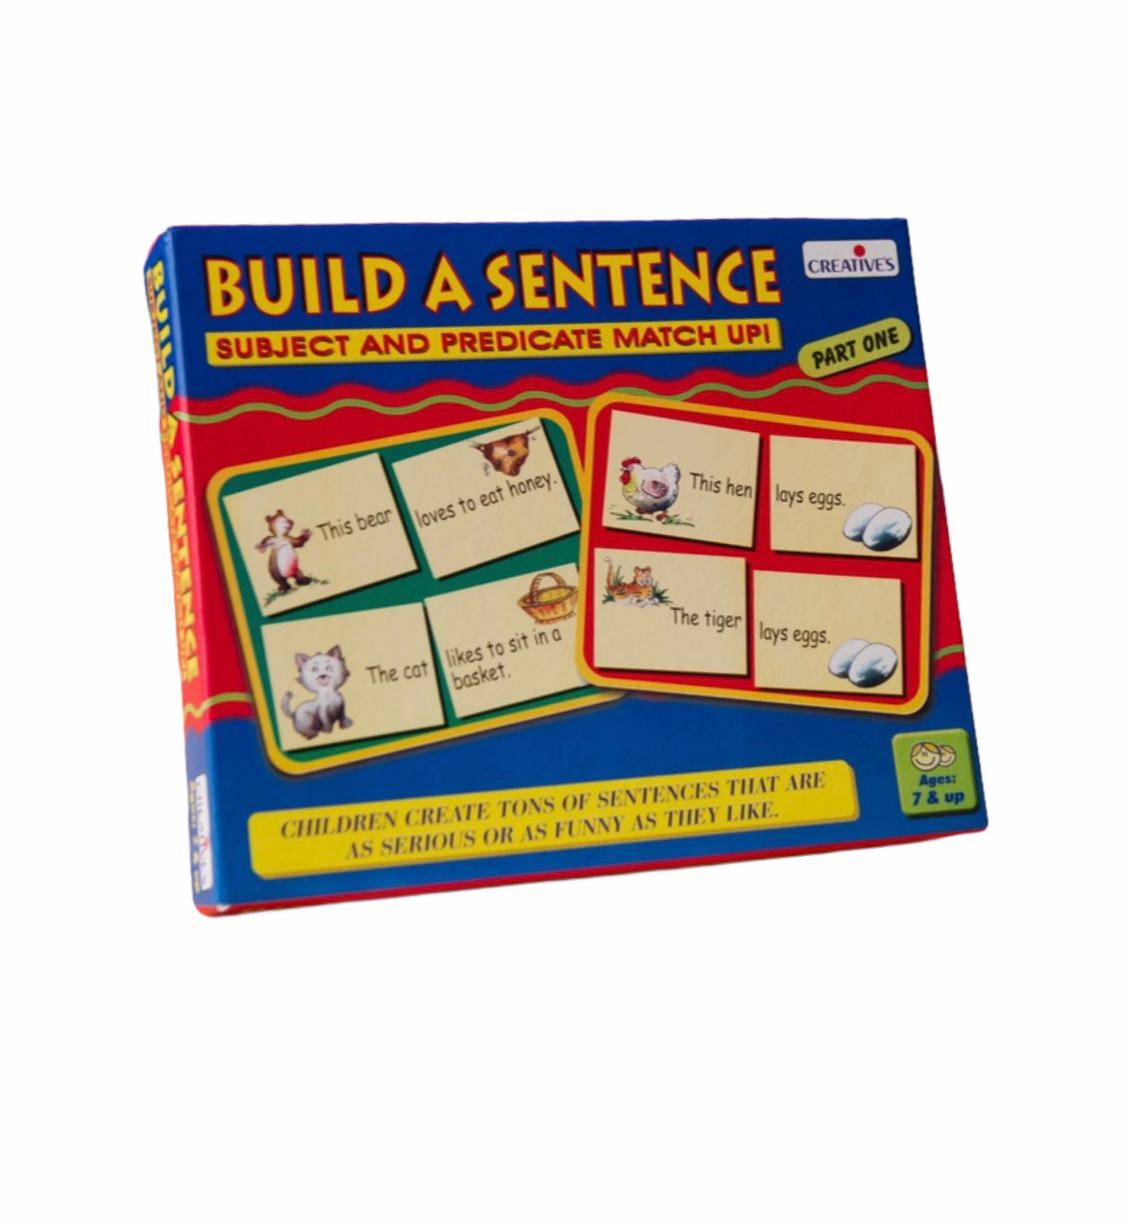 Build a Sentence - Part 1 packaging box on white background